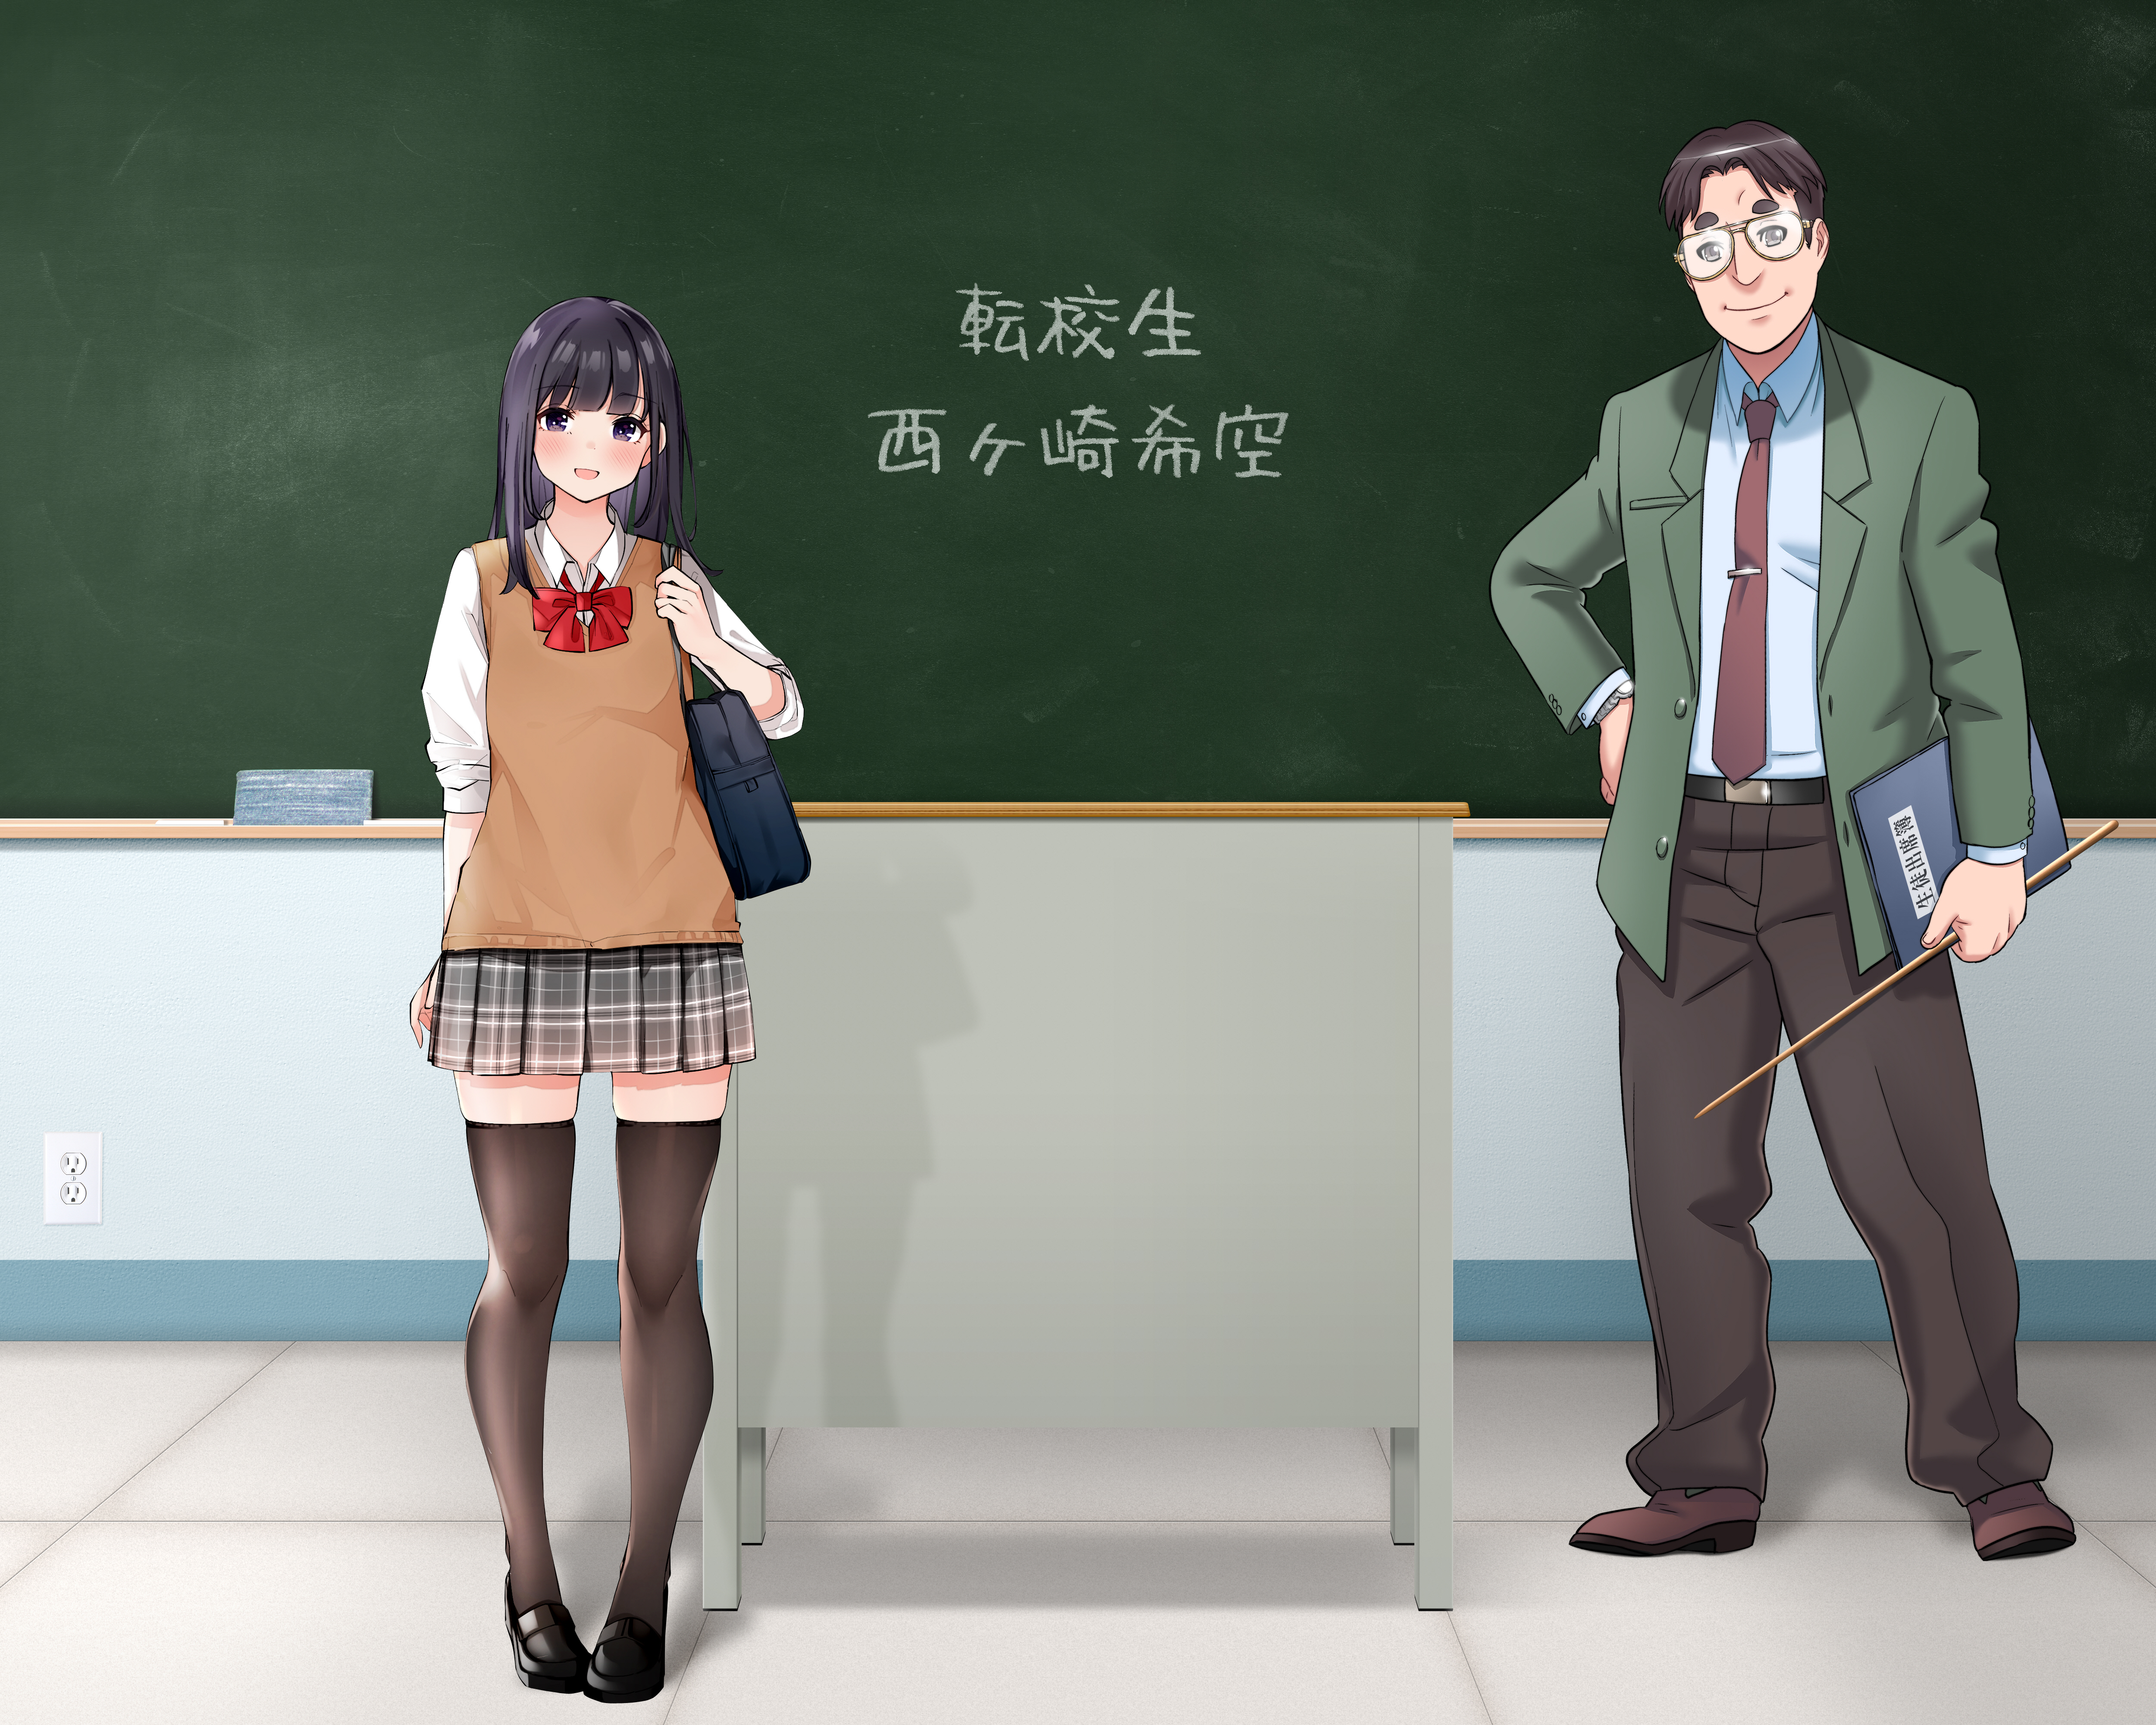 Anime 5000x4000 transfer student students teachers classroom introduction standing schoolgirl school uniform blushing looking at viewer chalkboard stockings anime boys anime girls smiling closed mouth open mouth glasses bow tie skirt tie bag